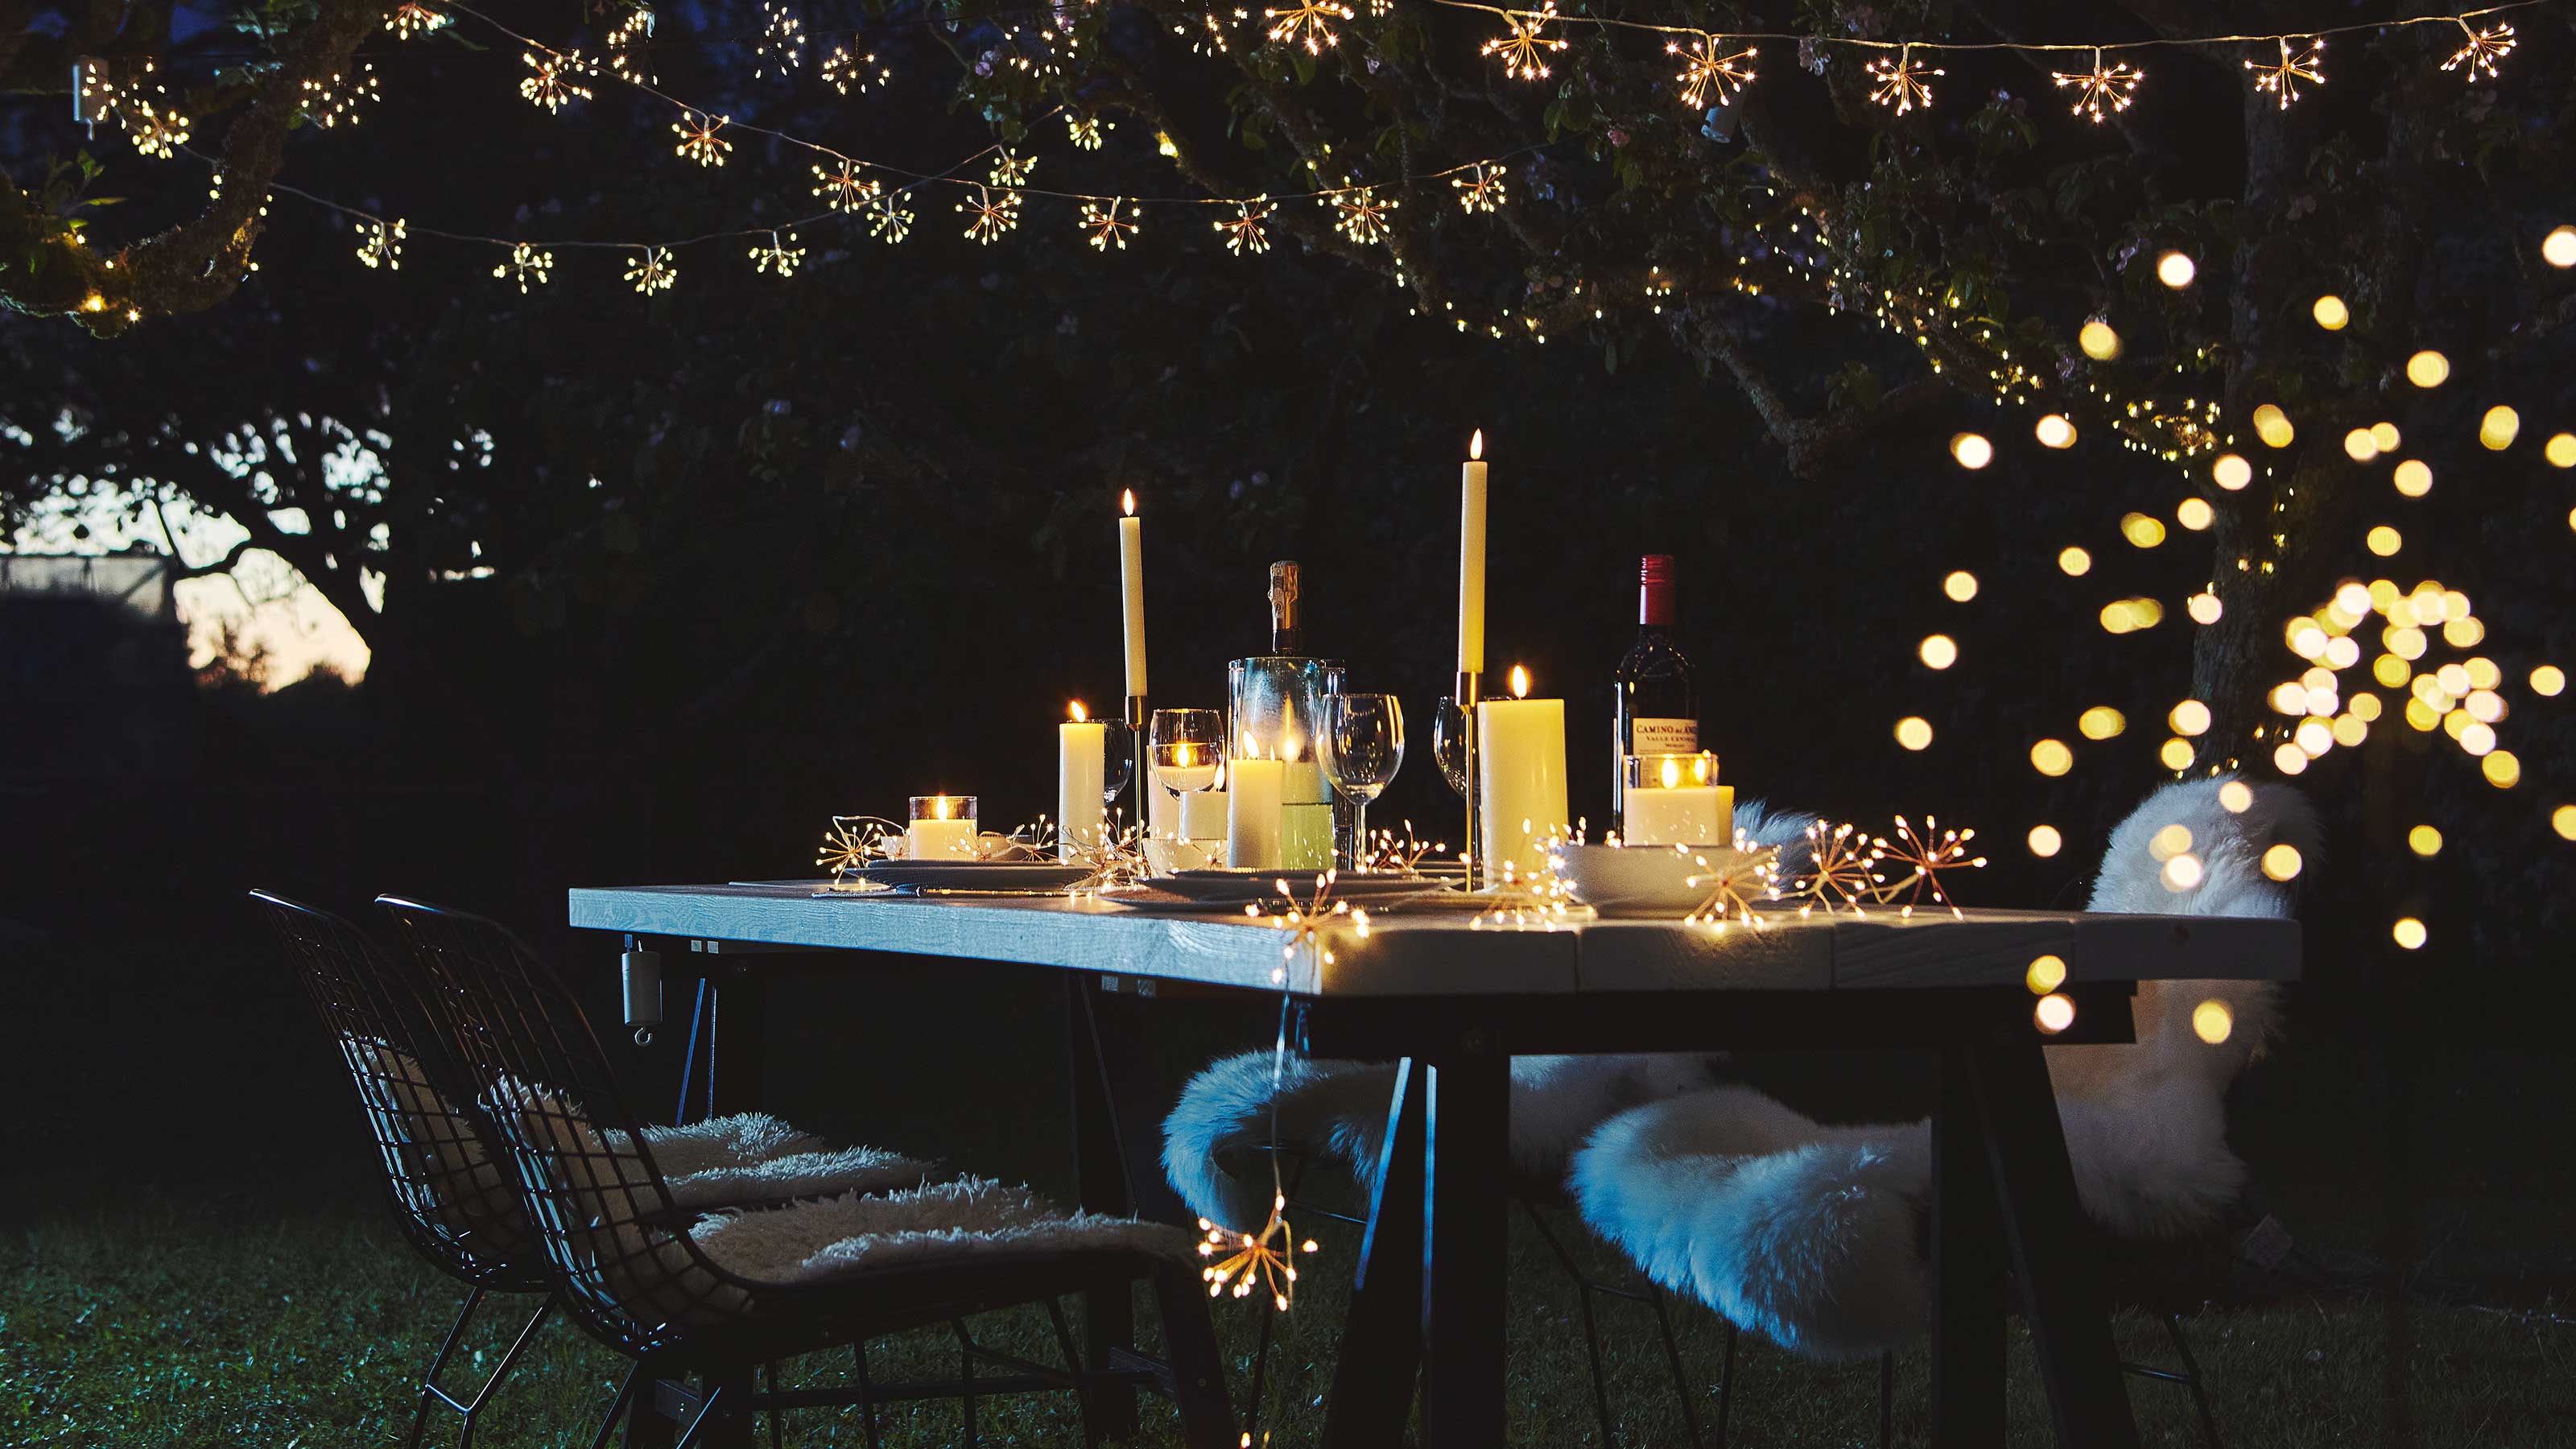 Backyard party lighting ideas: enchanting looks to dazzle your guests | Gardeningetc